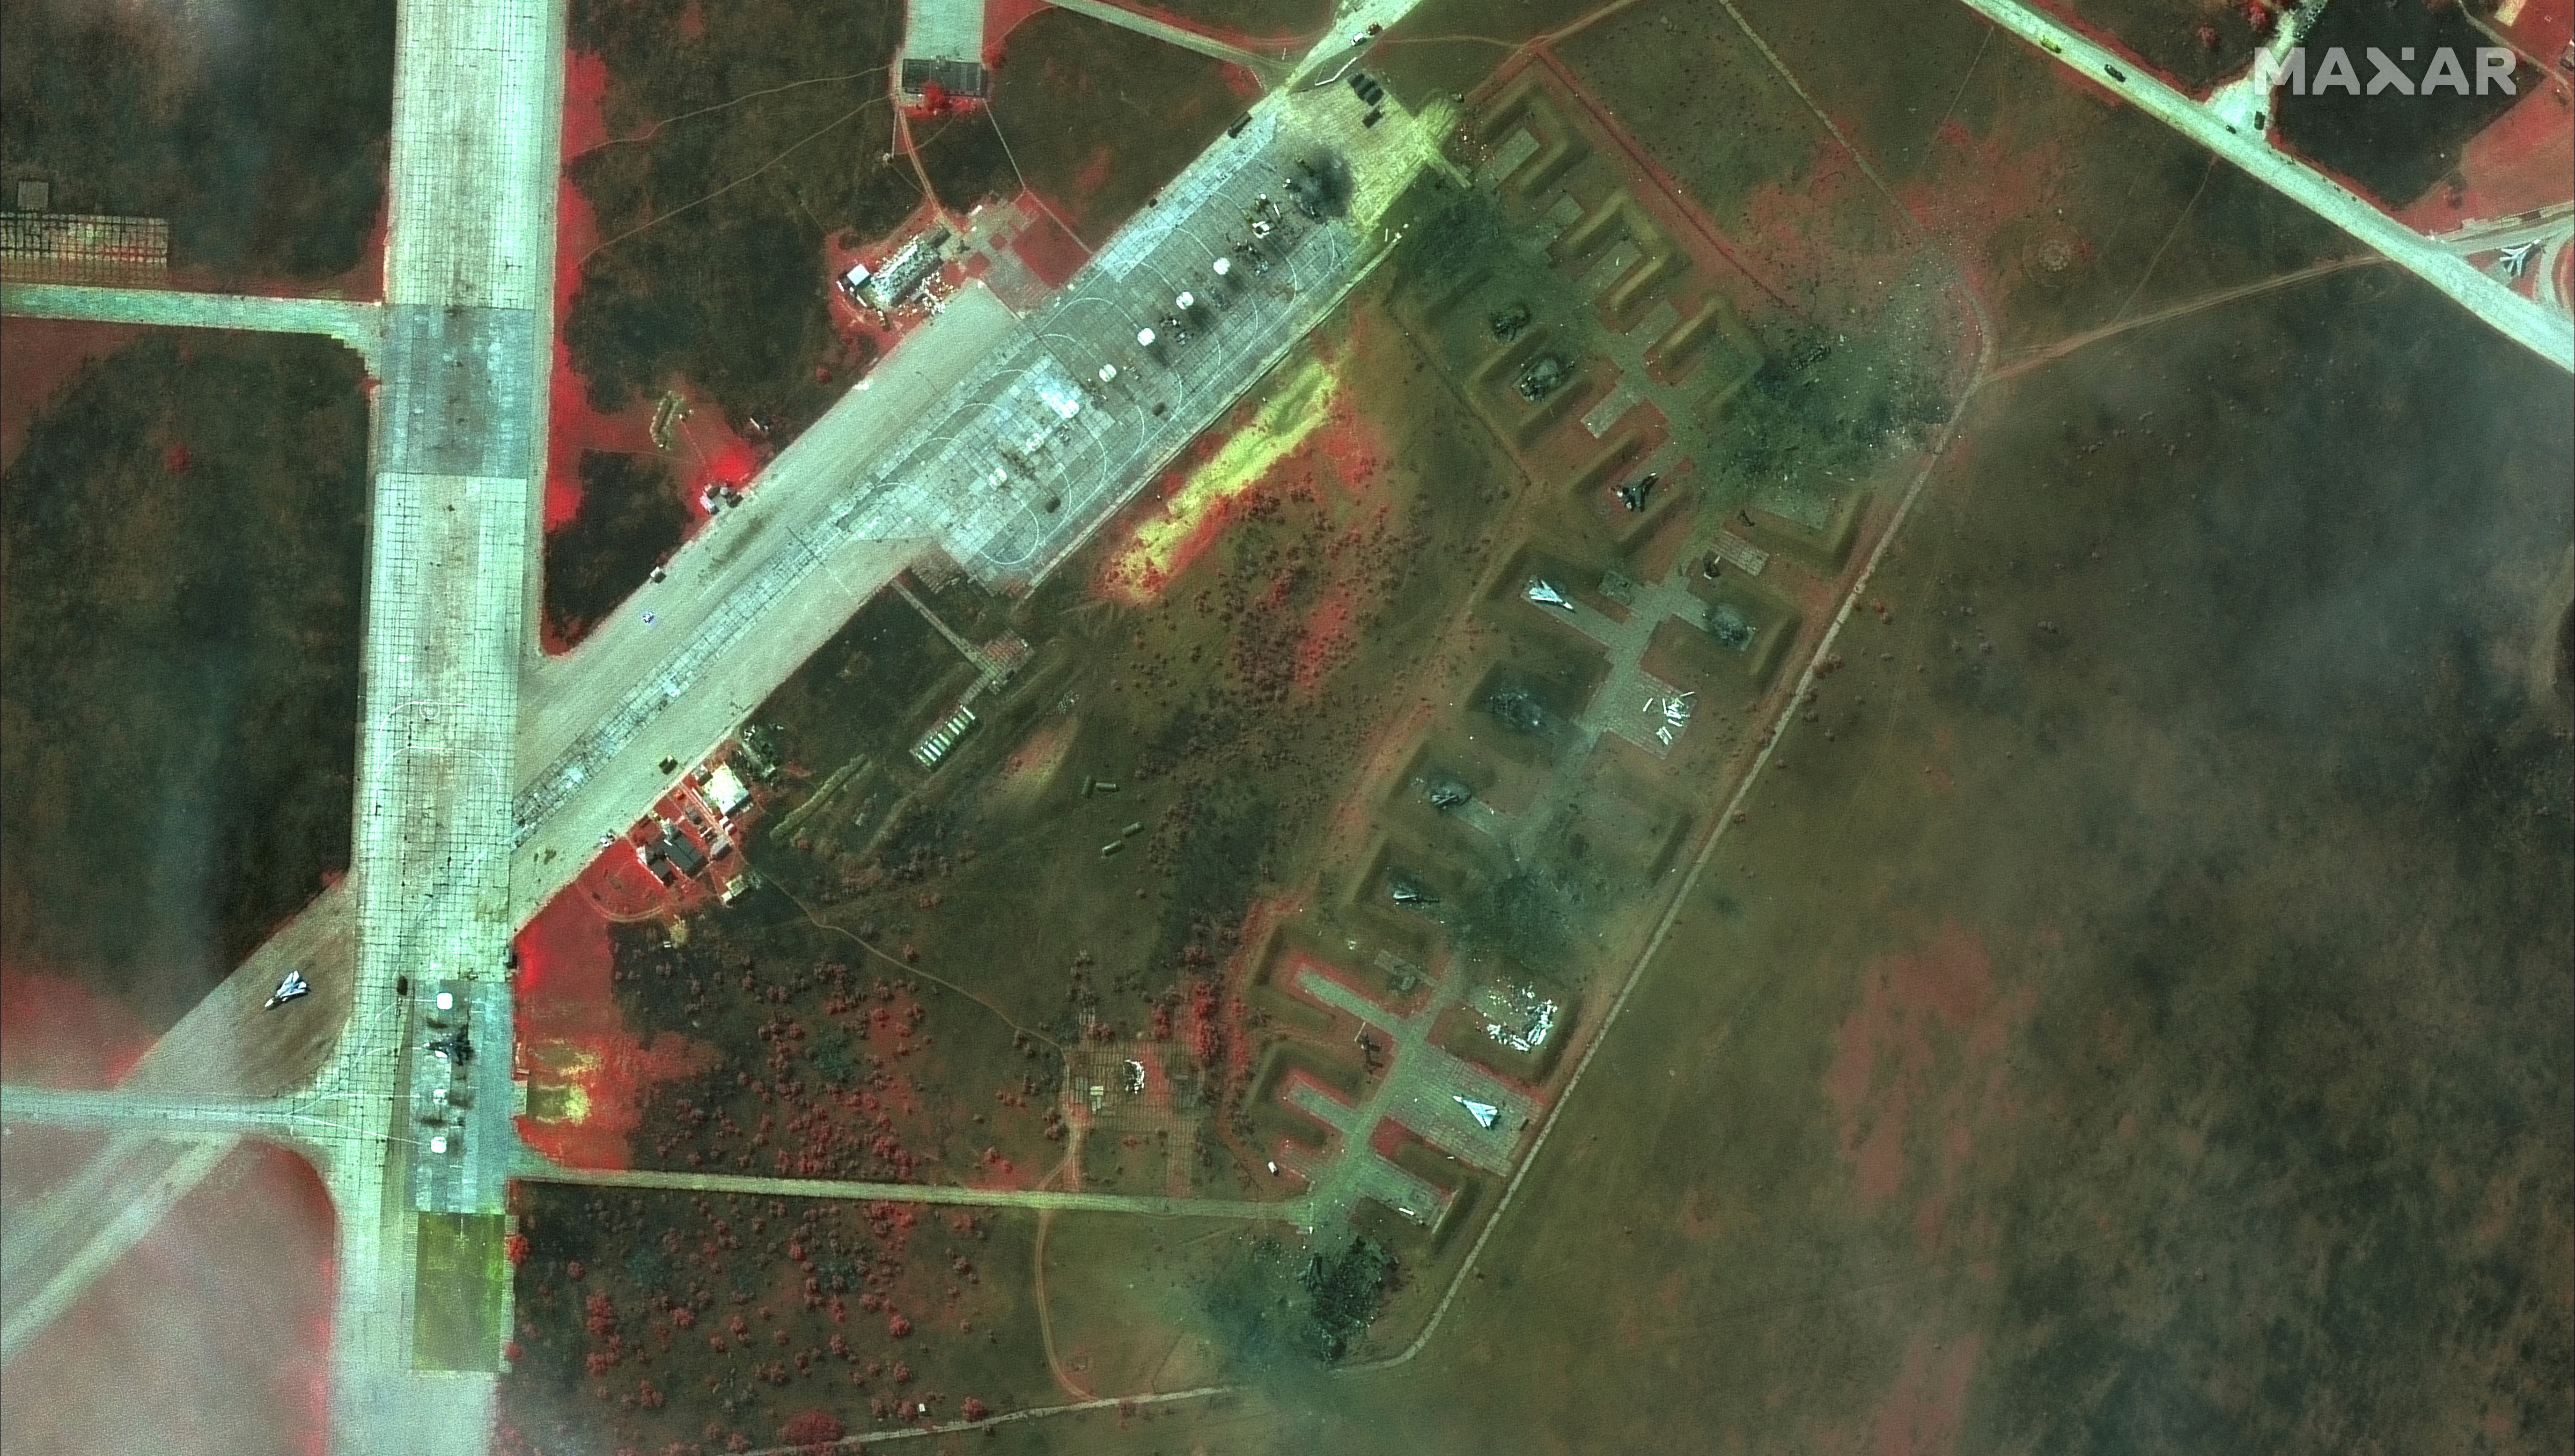 An overview of Saki Airbase after attack, in Novofedorivka